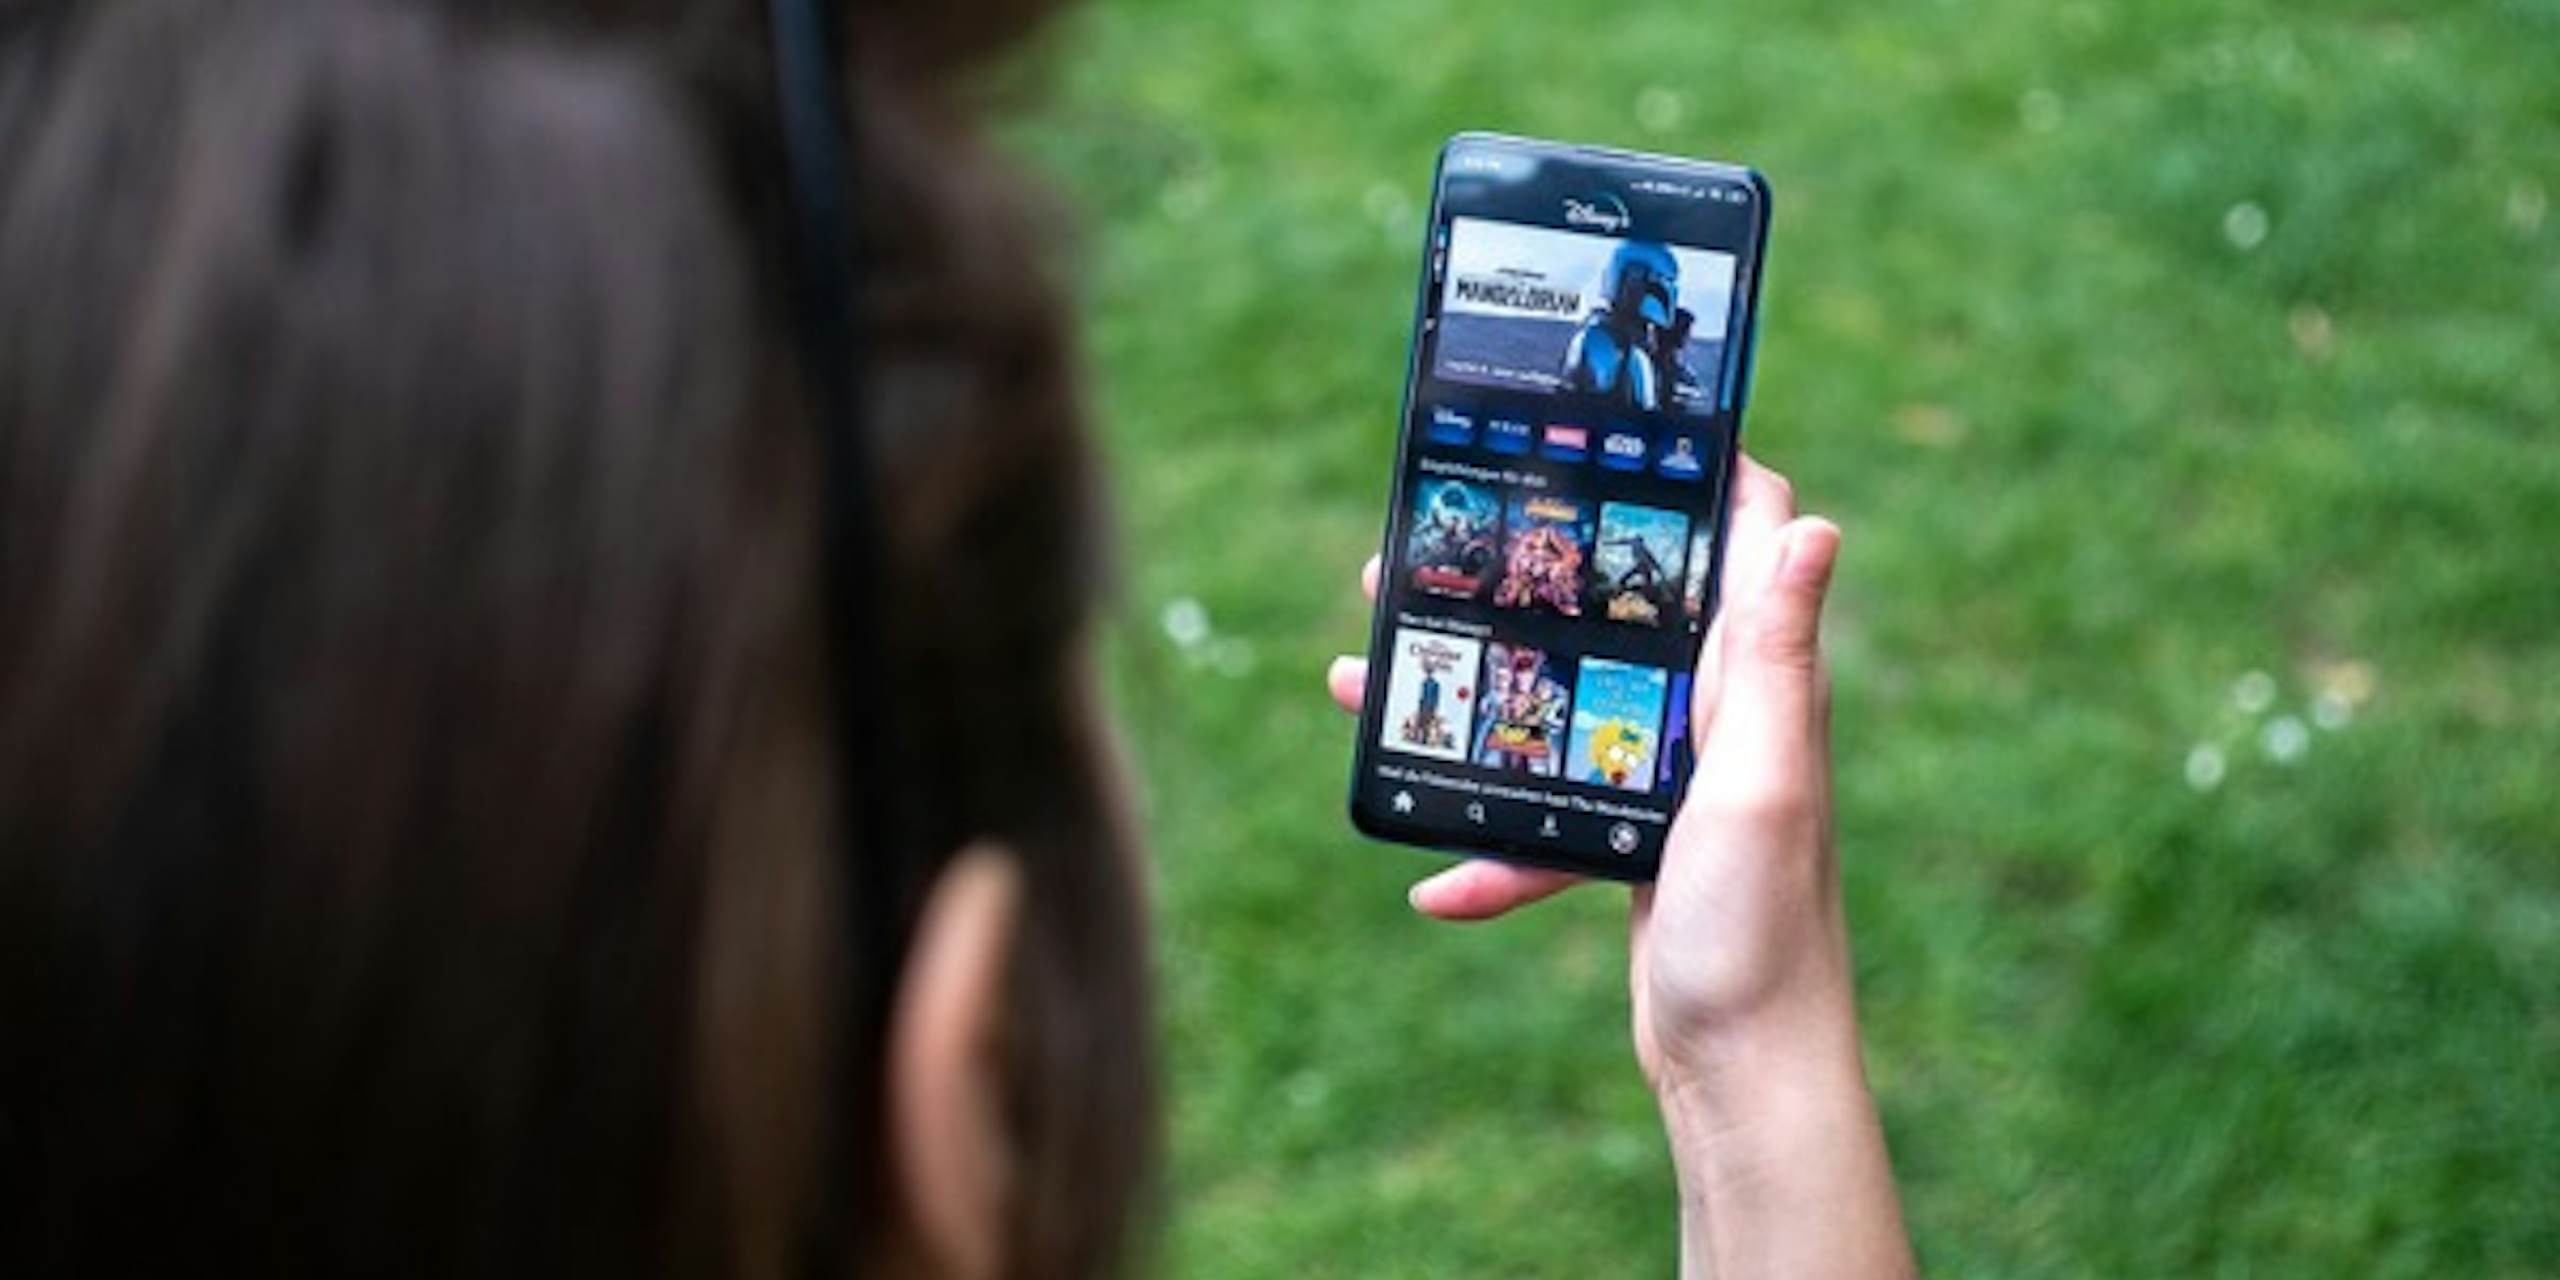 Want to benefit from APAC's OTT premium video wave? Here's what you need to know